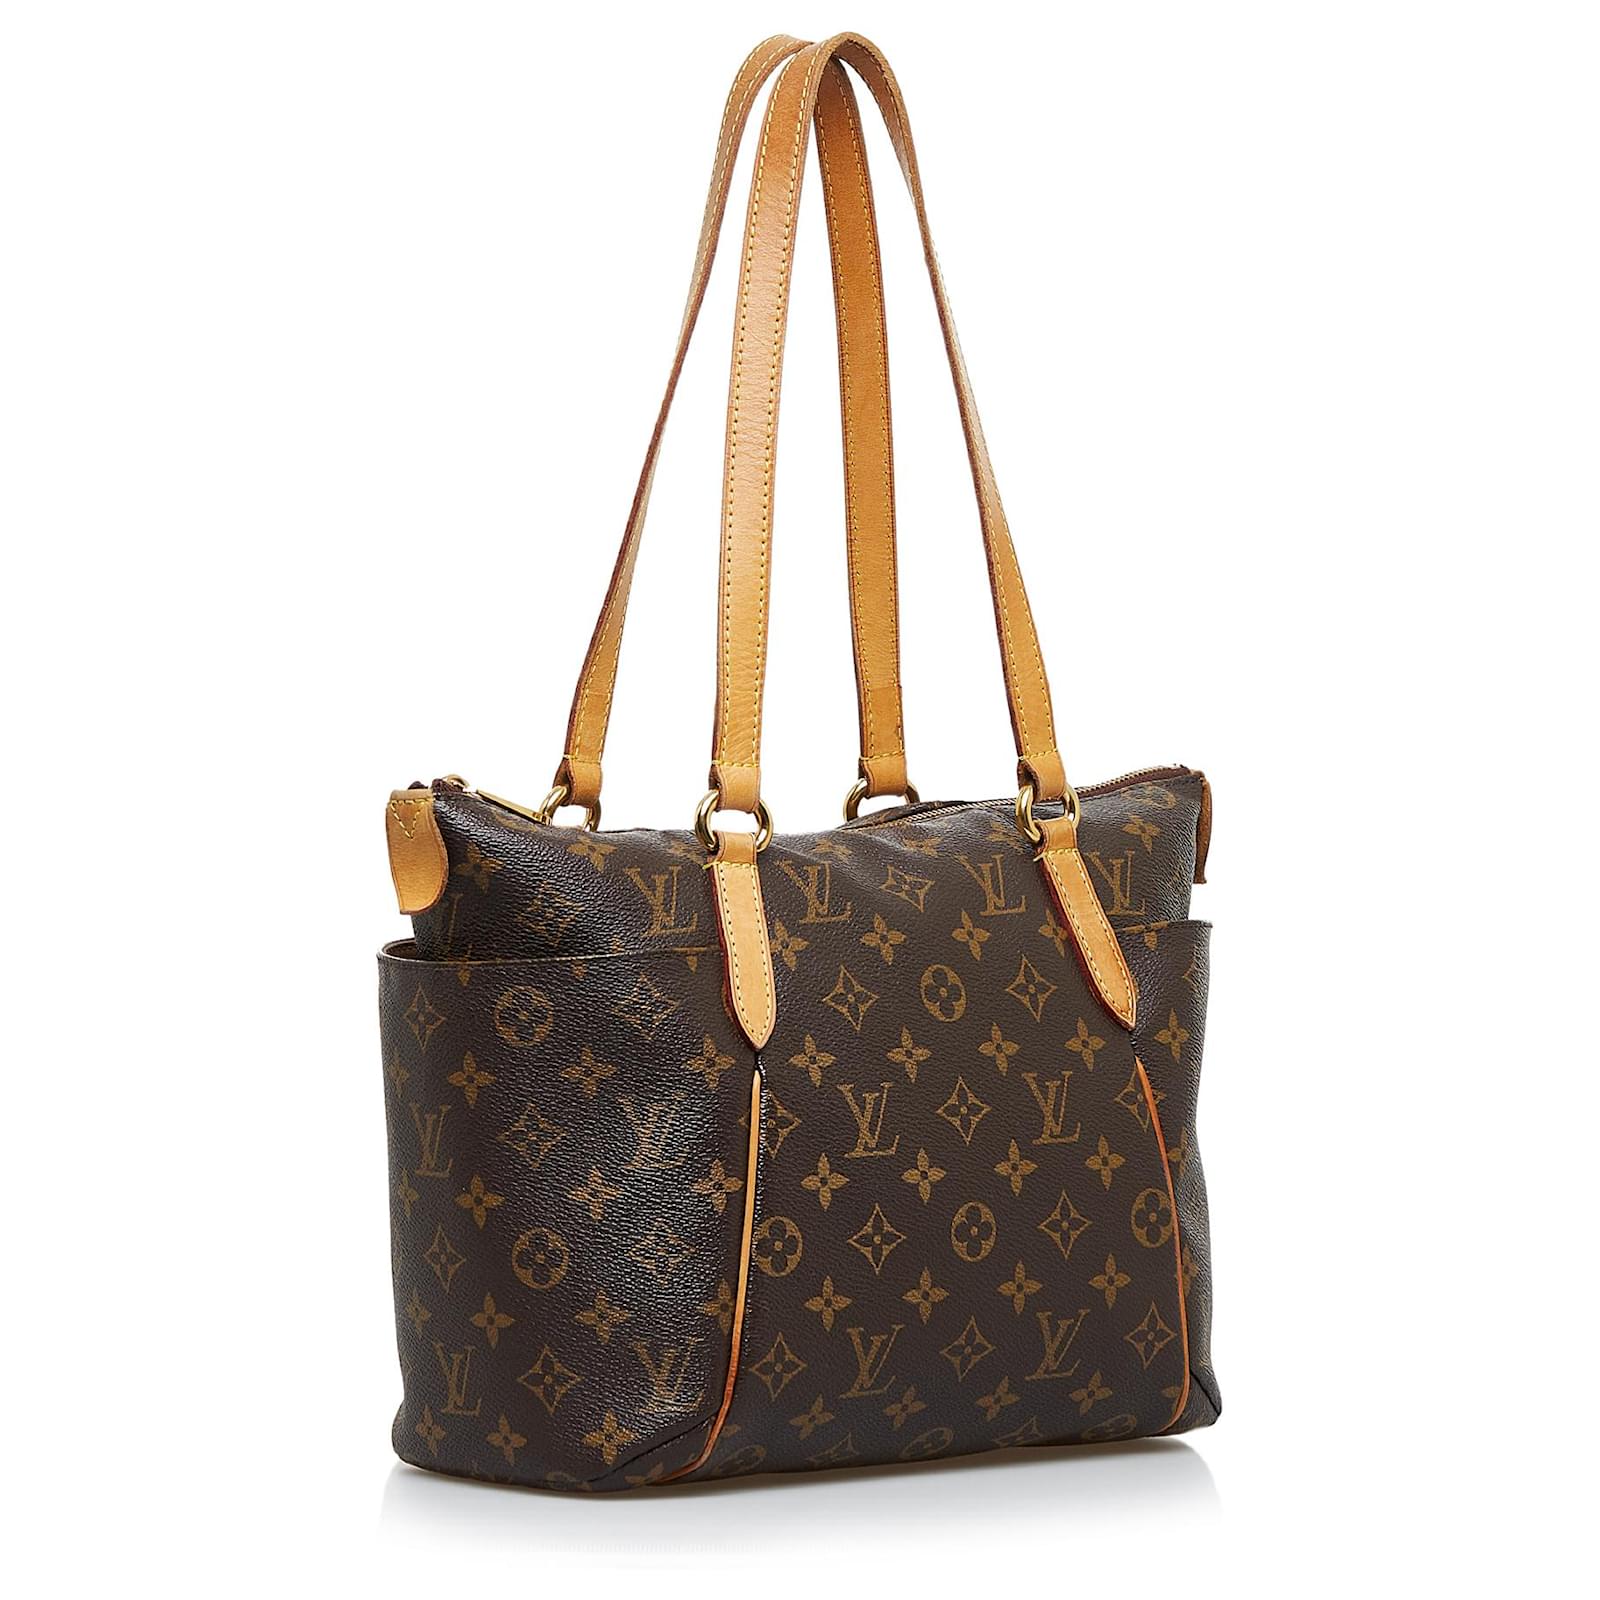 LV Totally PM Tote